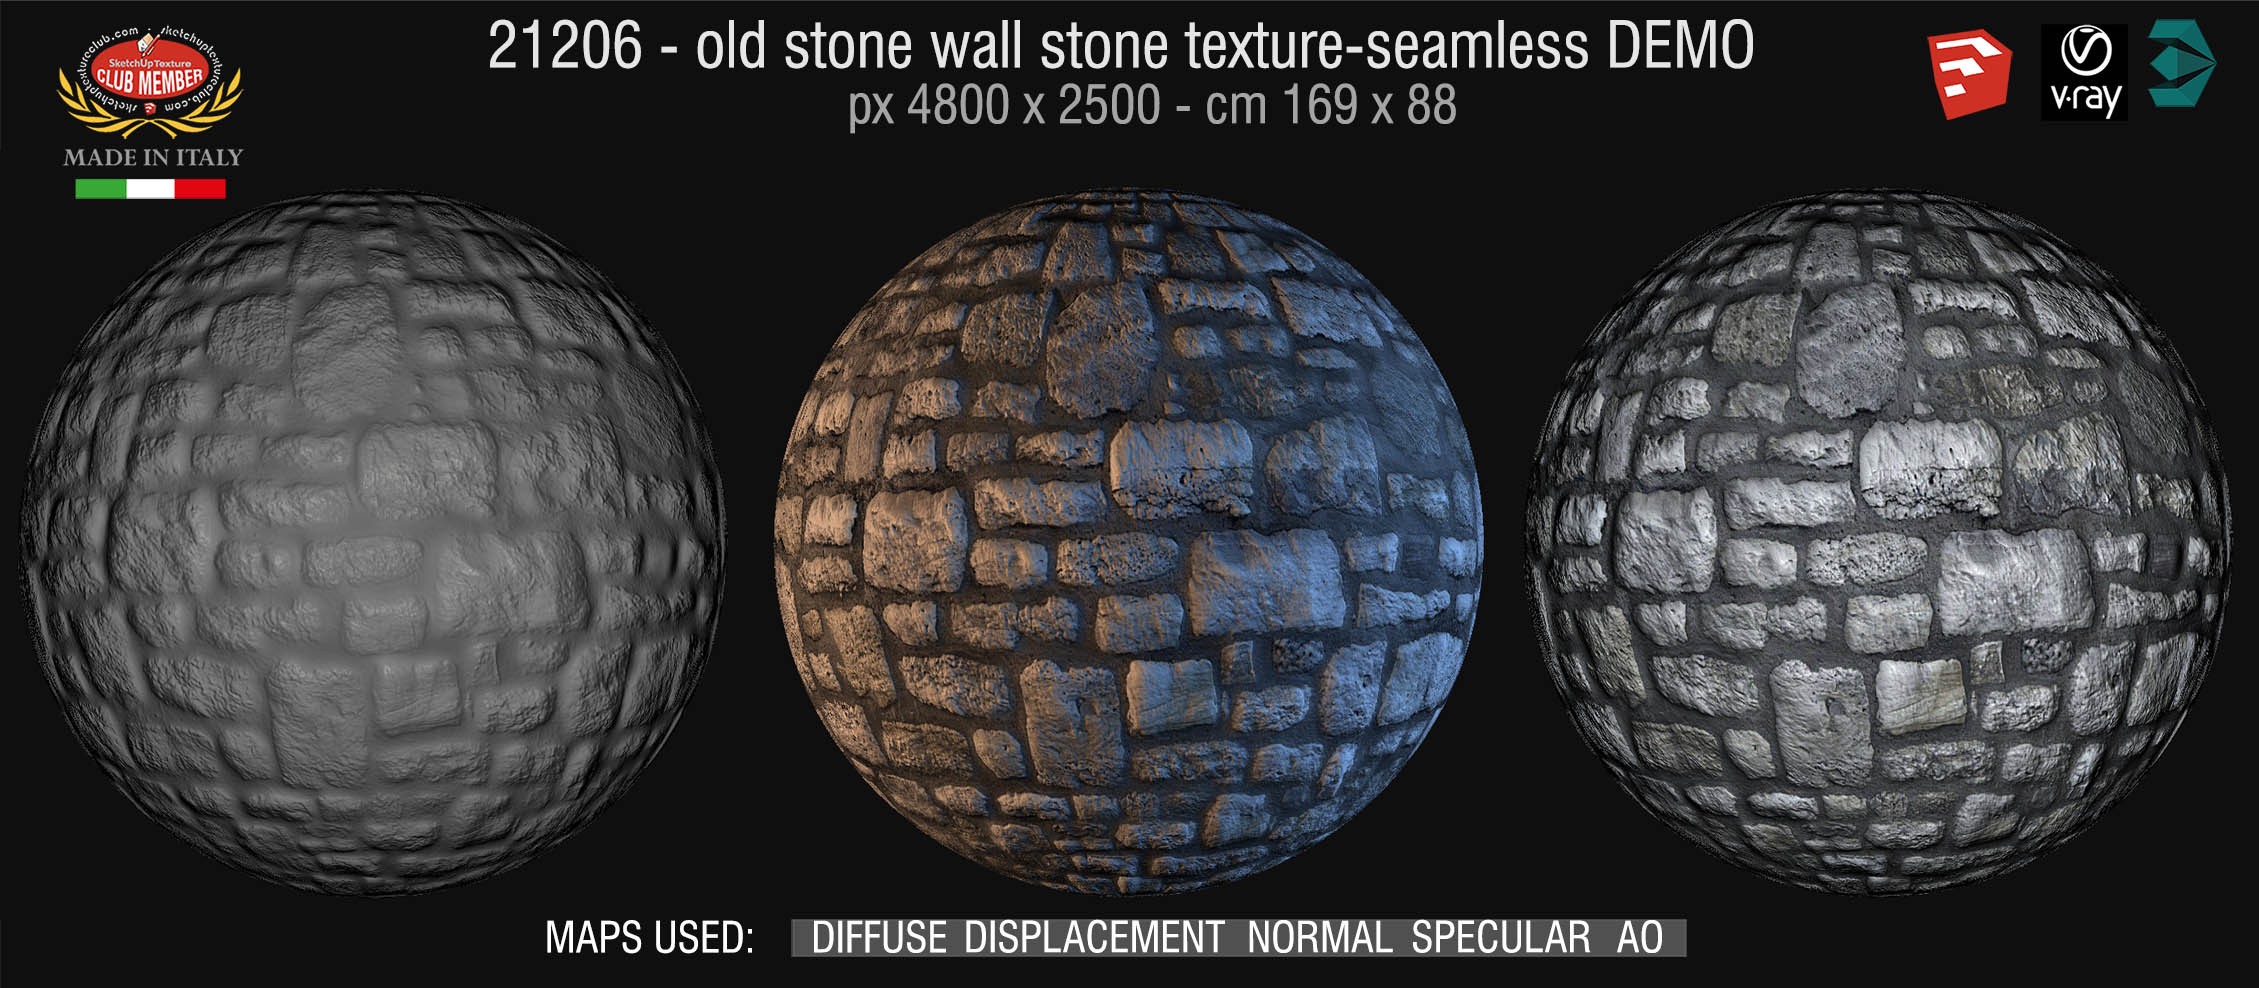 21206 HR Old wall stone texture seamless + maps DEMO